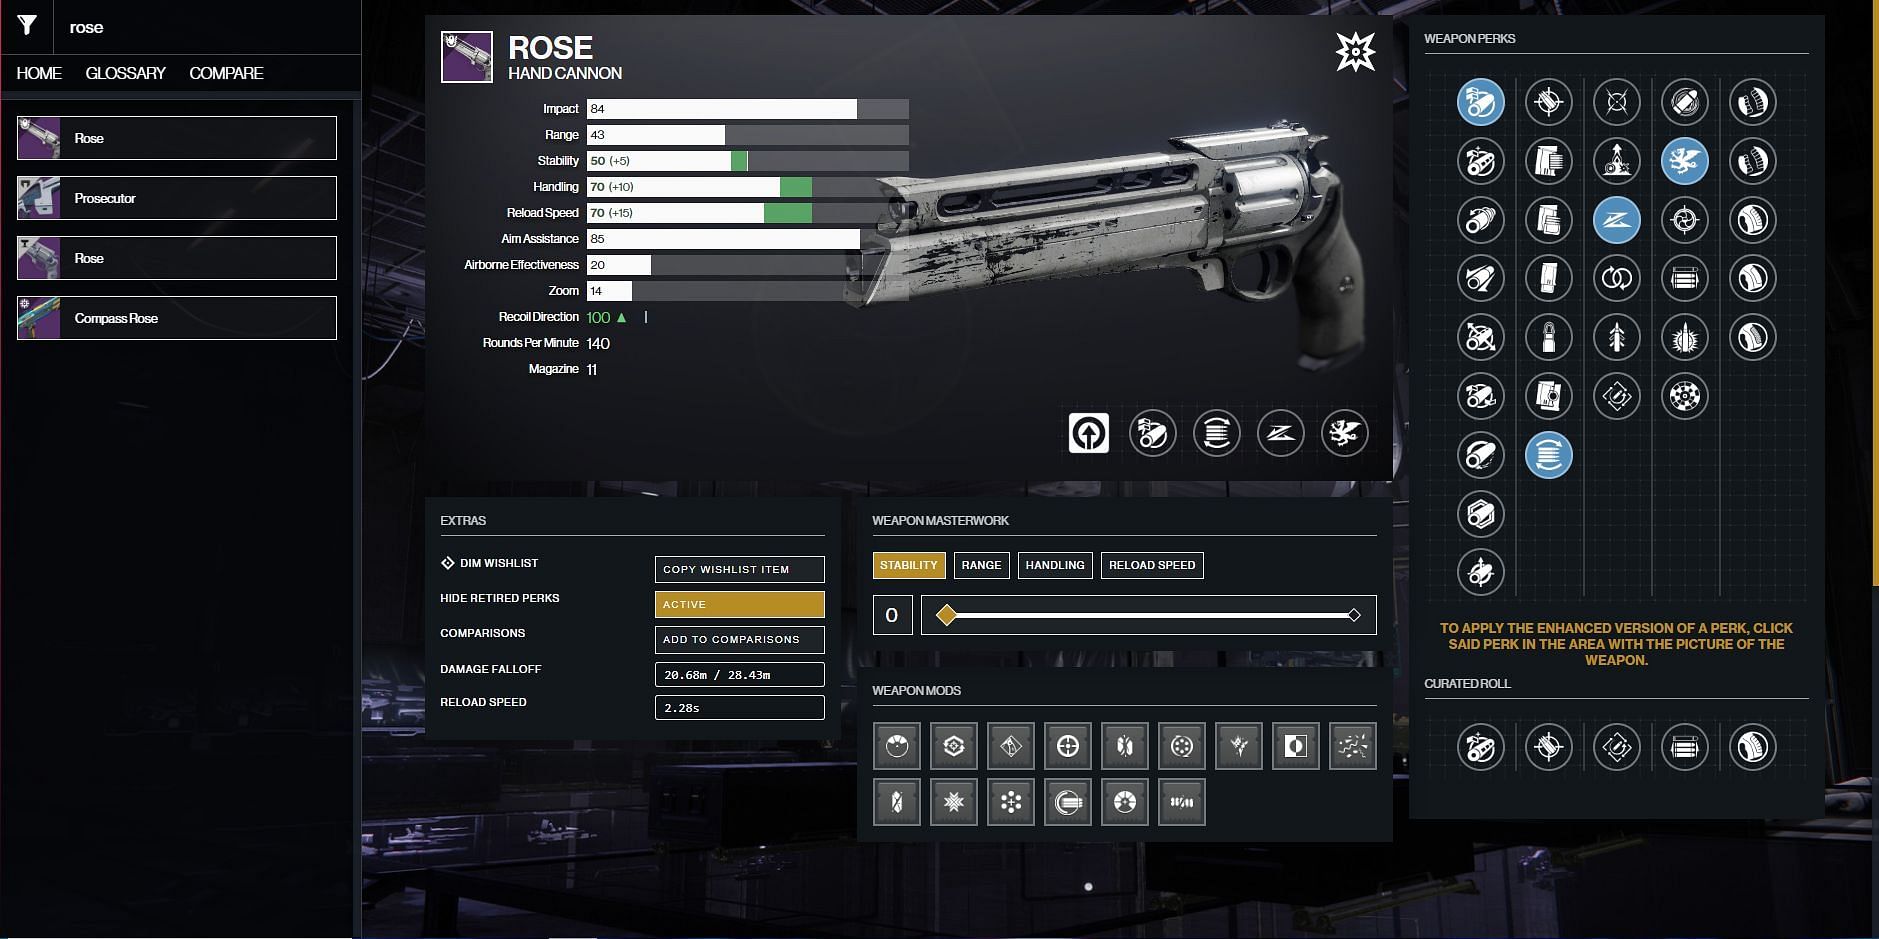 Destiny 2 god roll guide Rose for PvP and PvE